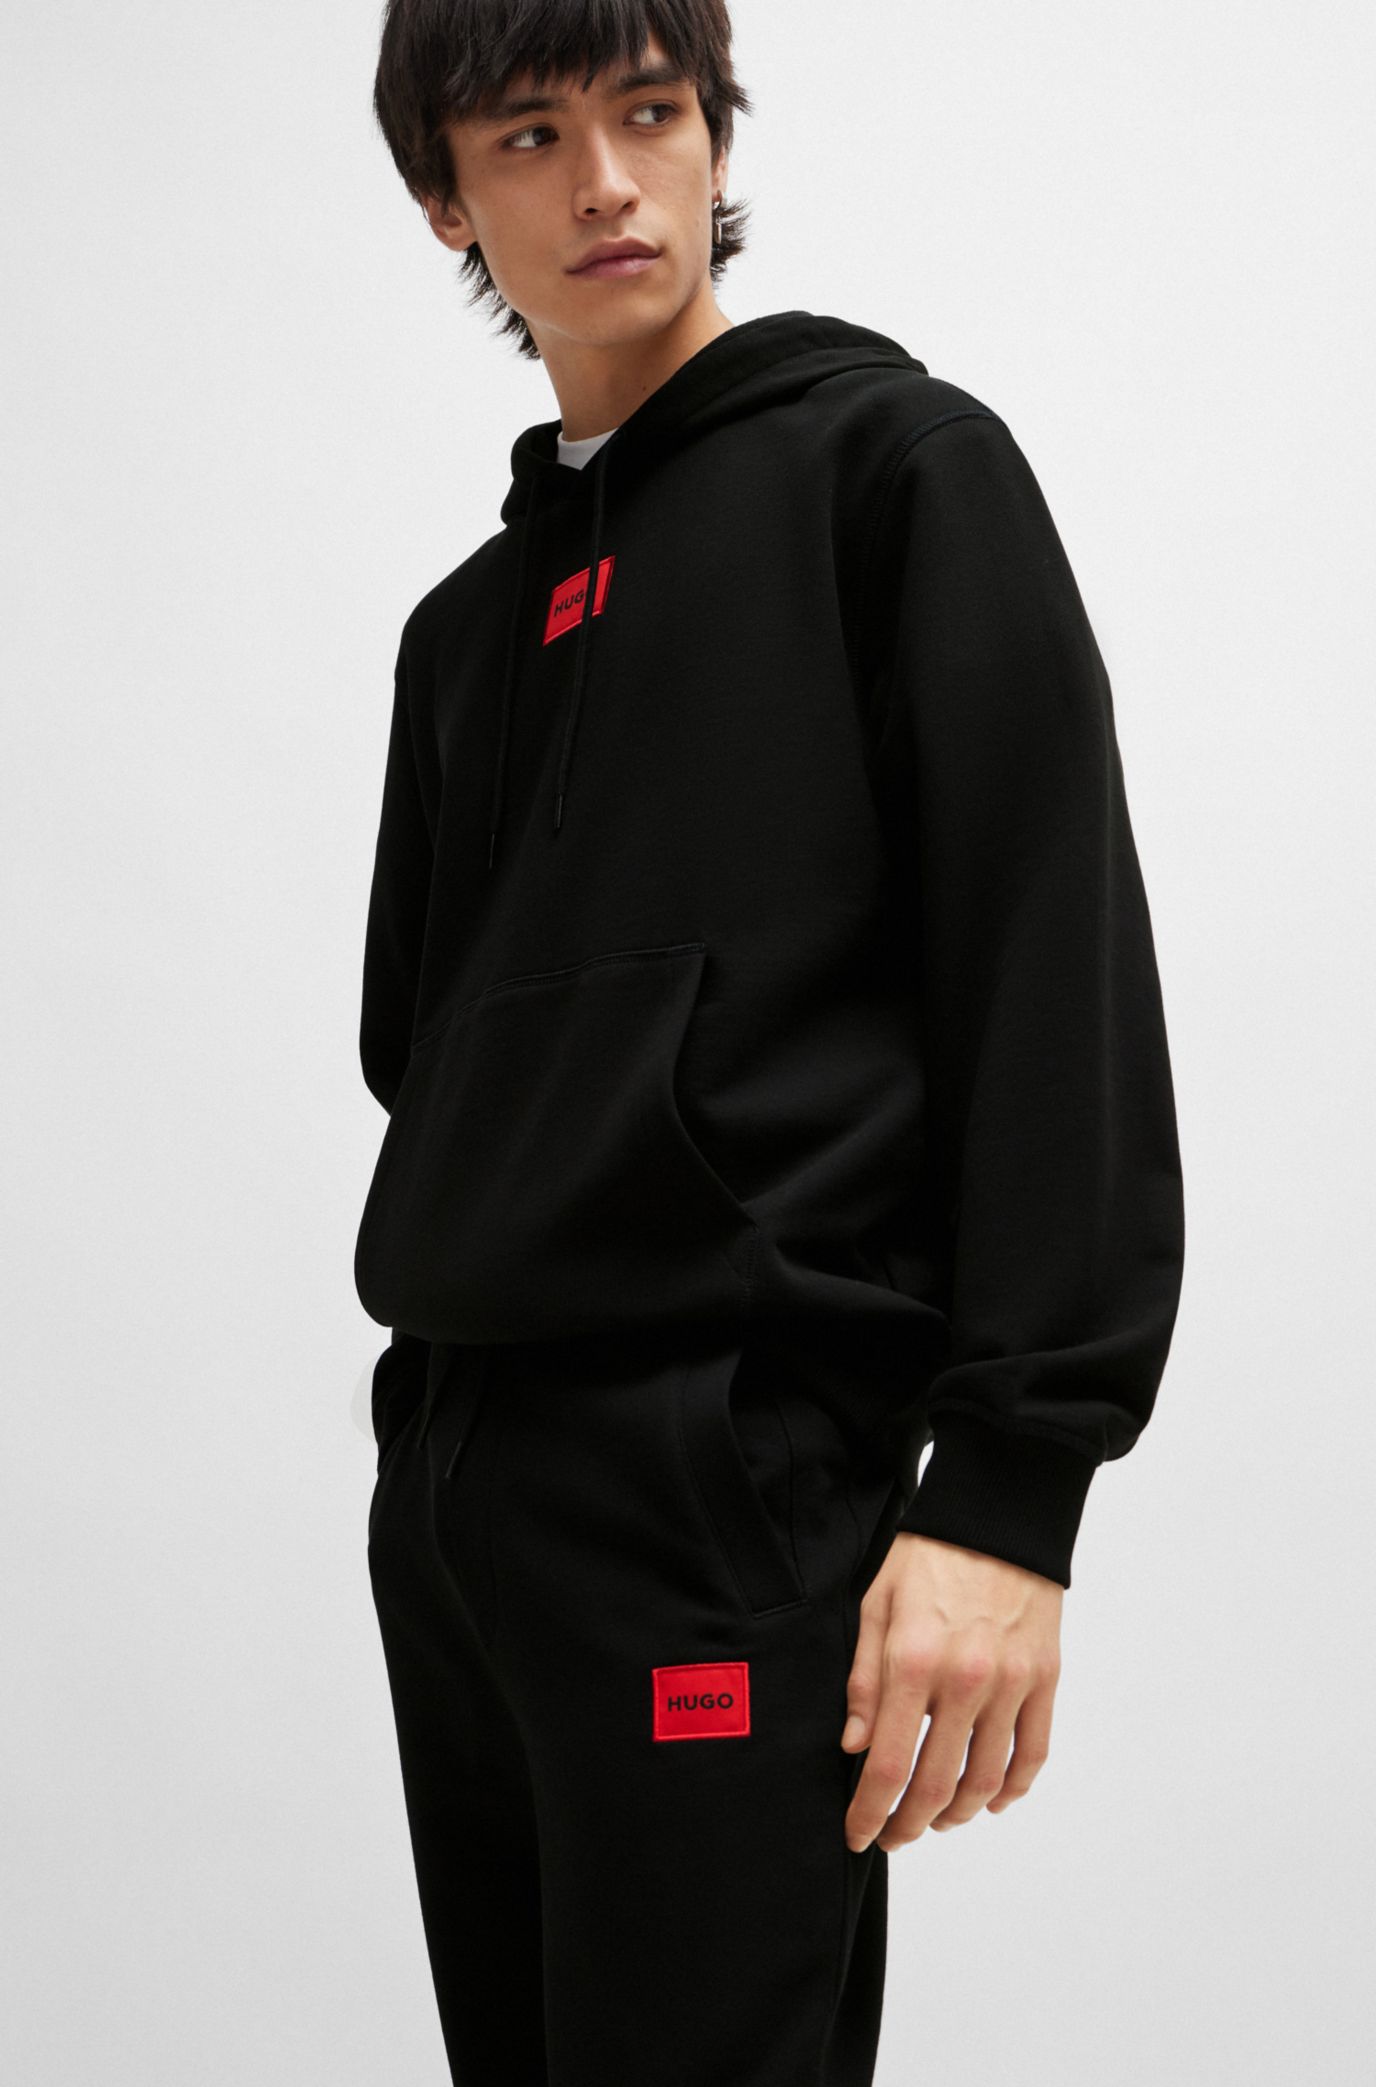 HUGO - Cotton-terry logo bottoms red label tracksuit with